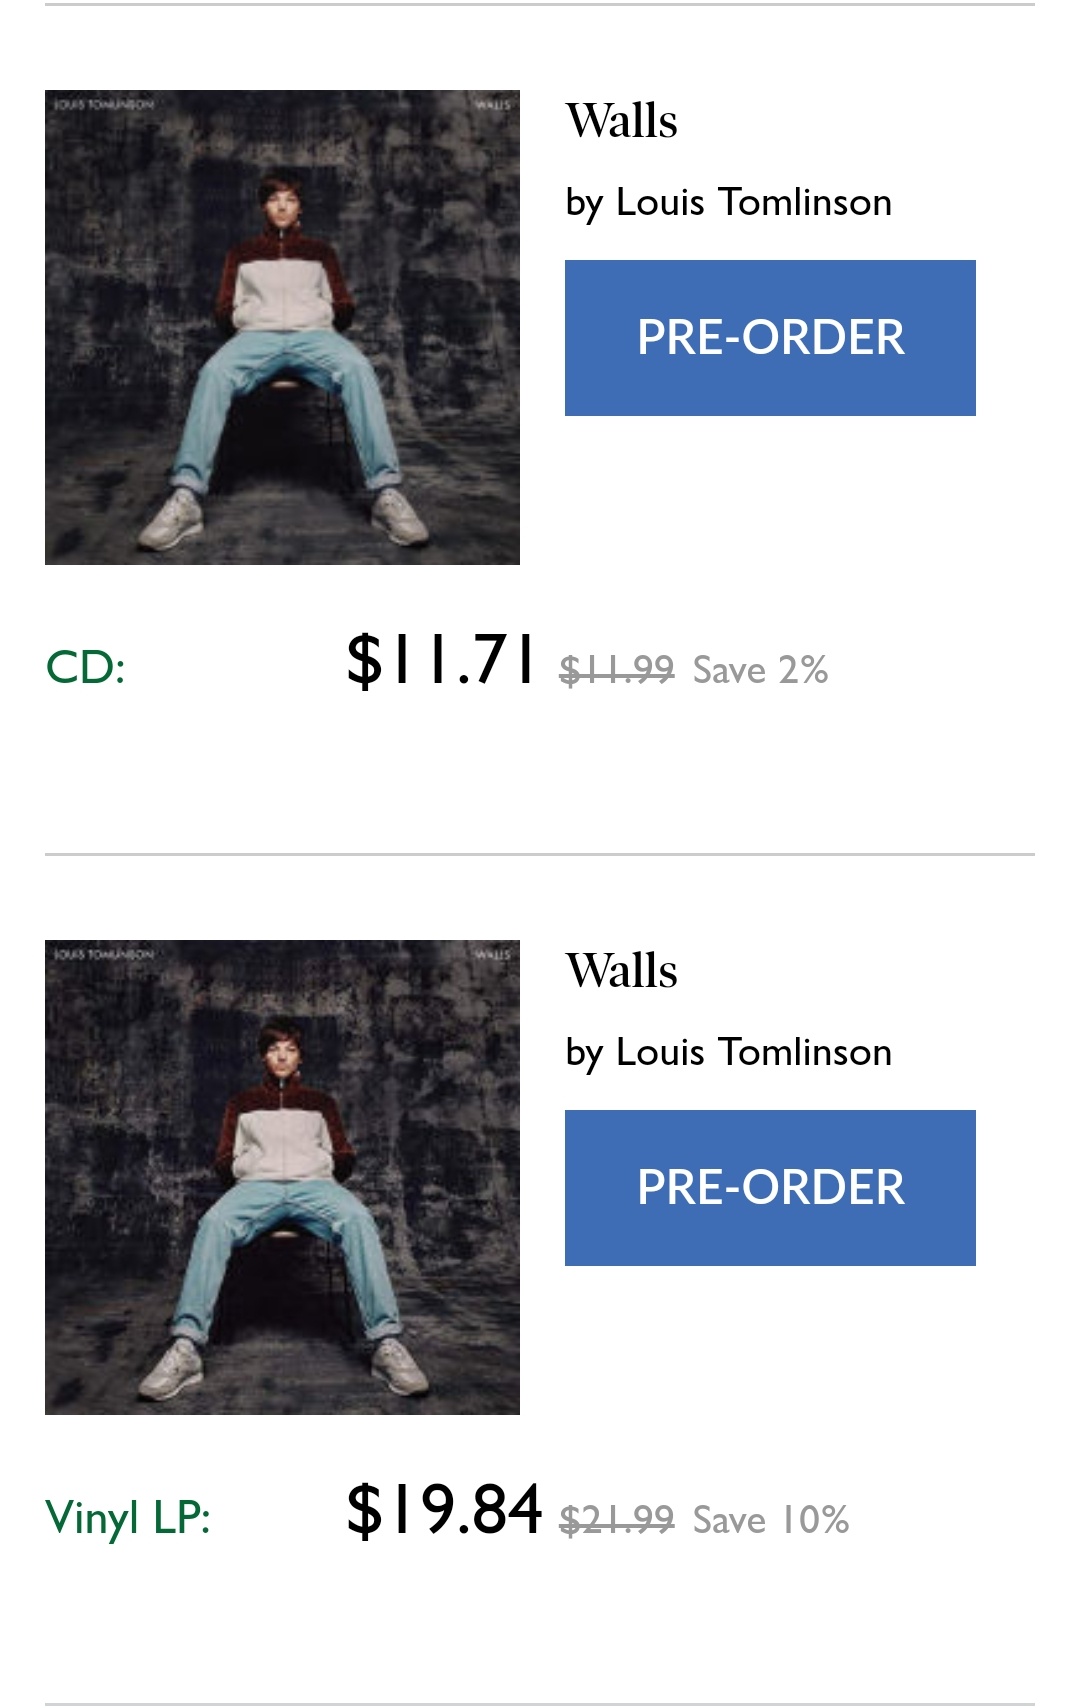 Louis Tomlinson News on X: #Update  #Walls, the CD and Vinyl, are now  available to pre-order online at Barnes and Noble. Pre-order here:    / X